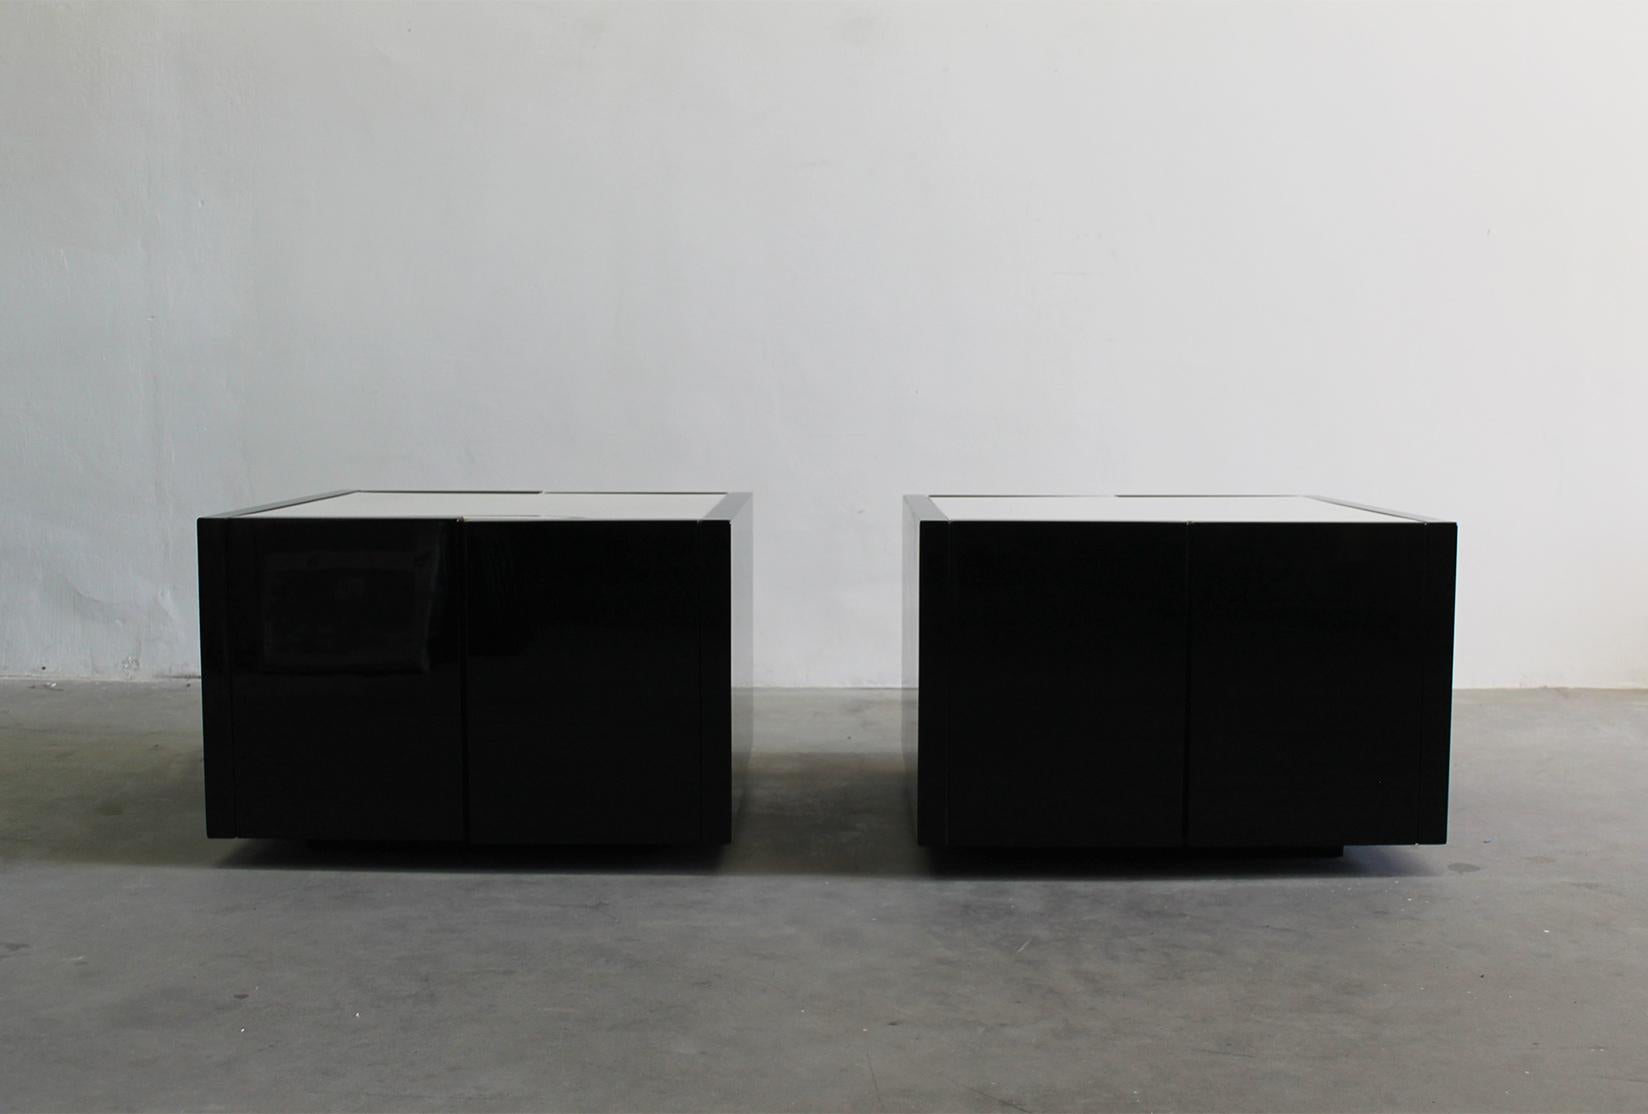 Set of two luminous side table/cabinet bar in black lacquered wood, these piece presents two openable opposite doors and inner shelves. 

Designed by Massimo and Lella Vignelli and produced by Poltronova in the 1960s 

Massimo Vignelli was a